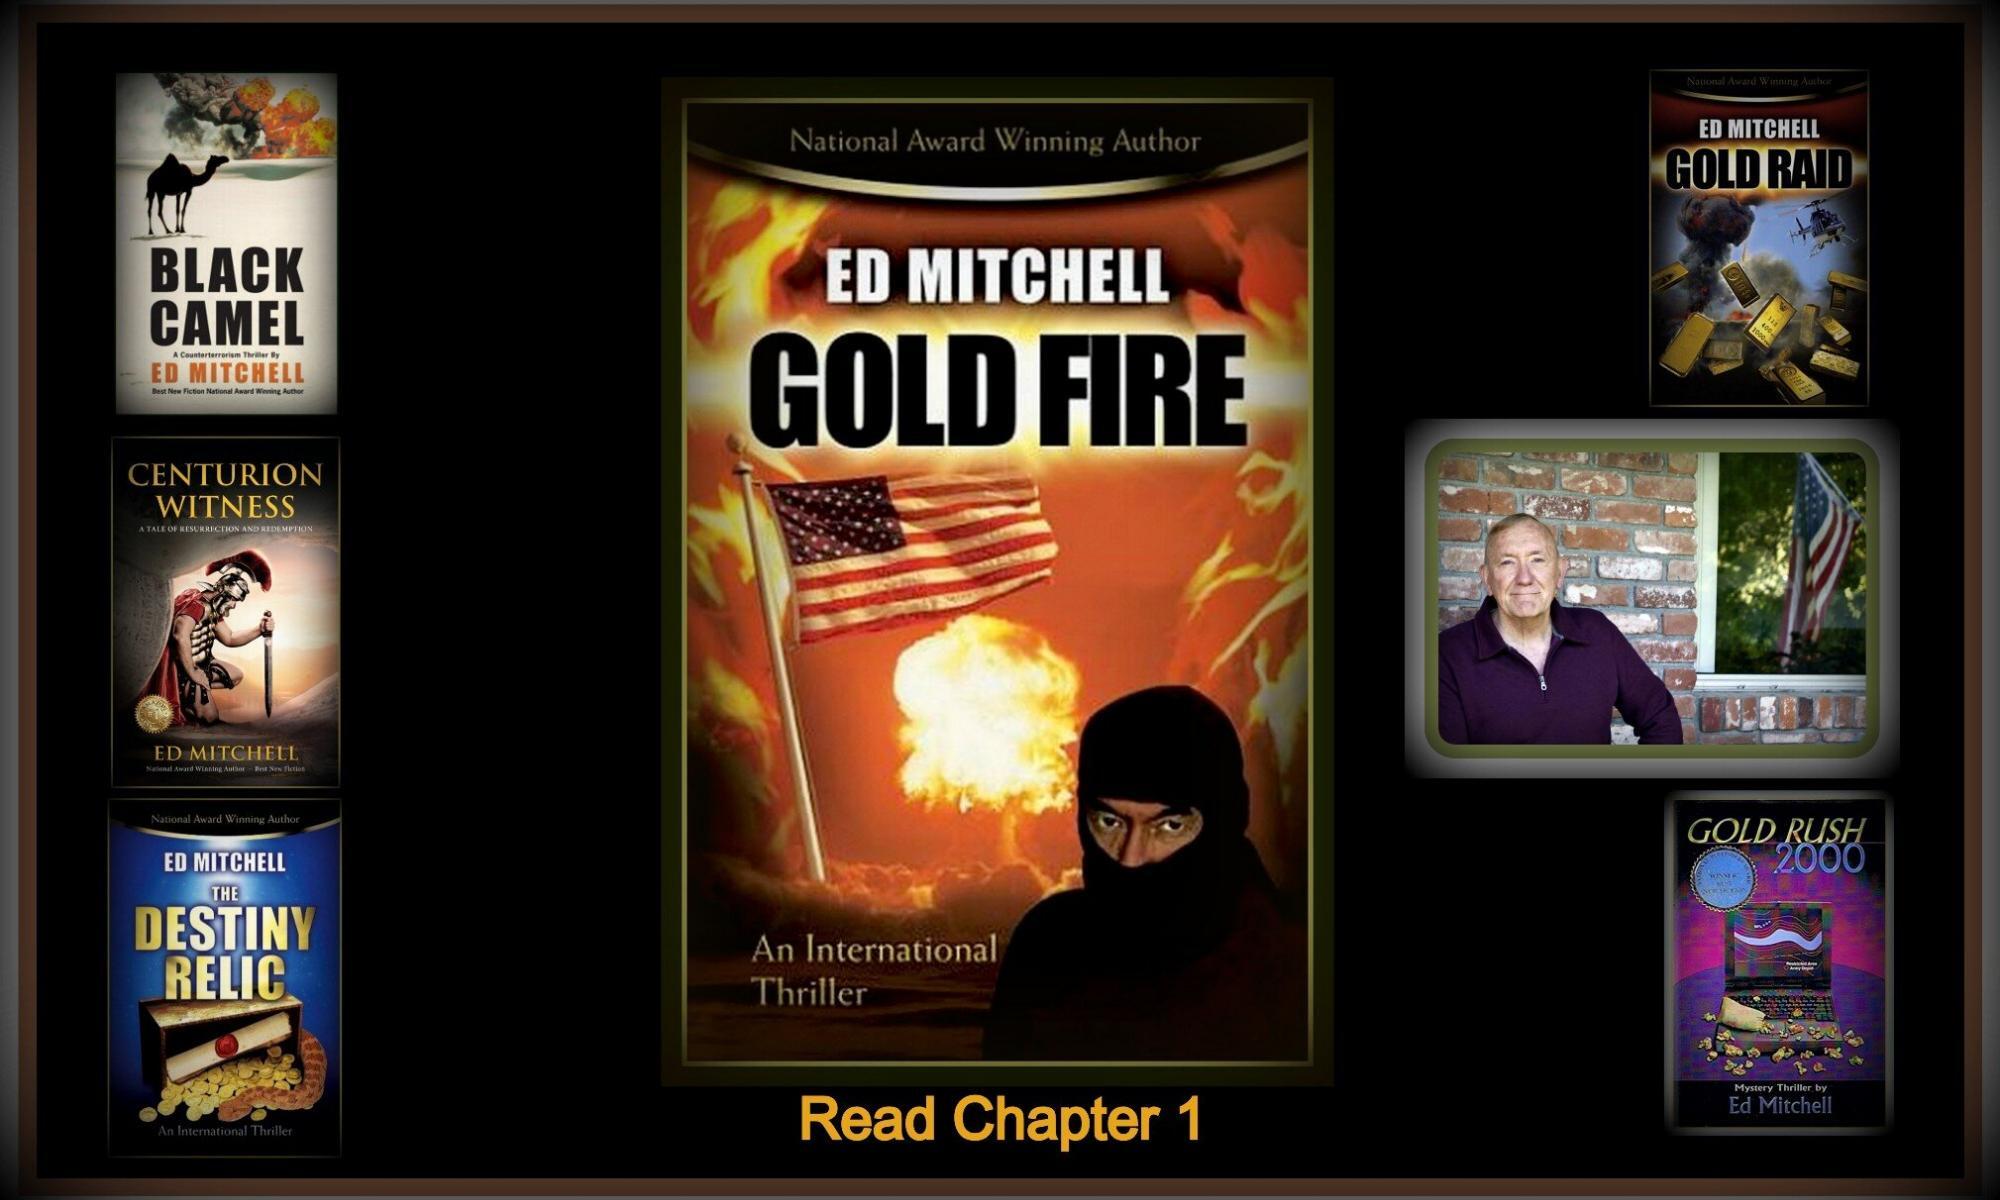 Book by Ed Mitchell. Gold Fire